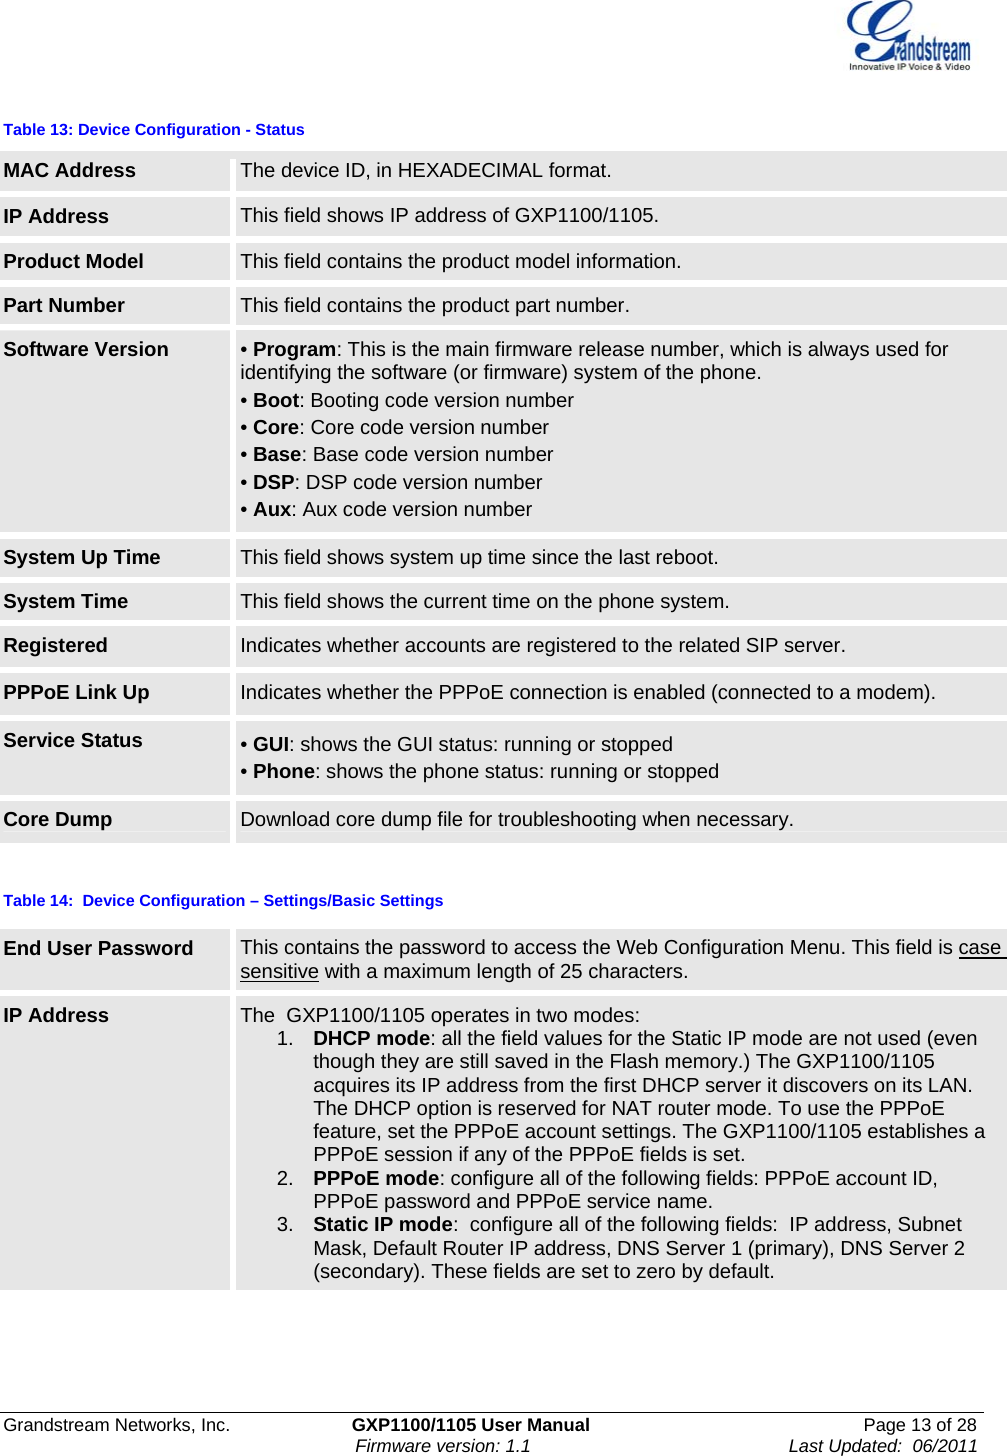    Grandstream Networks, Inc.                        GXP1100/1105 User Manual                                                      Page 13 of 28                                                                      Firmware version: 1.1                                                   Last Updated:  06/2011  Table 13: Device Configuration - Status  MAC Address   The device ID, in HEXADECIMAL format. IP Address  This field shows IP address of GXP1100/1105. Product Model  This field contains the product model information. Part Number  This field contains the product part number. Software Version  • Program: This is the main firmware release number, which is always used for identifying the software (or firmware) system of the phone. • Boot: Booting code version number • Core: Core code version number • Base: Base code version number • DSP: DSP code version number • Aux: Aux code version number System Up Time  This field shows system up time since the last reboot. System Time  This field shows the current time on the phone system. Registered  Indicates whether accounts are registered to the related SIP server. PPPoE Link Up  Indicates whether the PPPoE connection is enabled (connected to a modem). Service Status  • GUI: shows the GUI status: running or stopped • Phone: shows the phone status: running or stopped Core Dump  Download core dump file for troubleshooting when necessary.  Table 14:  Device Configuration – Settings/Basic Settings  End User Password  This contains the password to access the Web Configuration Menu. This field is case sensitive with a maximum length of 25 characters. IP Address  The  GXP1100/1105 operates in two modes: 1.  DHCP mode: all the field values for the Static IP mode are not used (even though they are still saved in the Flash memory.) The GXP1100/1105 acquires its IP address from the first DHCP server it discovers on its LAN. The DHCP option is reserved for NAT router mode. To use the PPPoE feature, set the PPPoE account settings. The GXP1100/1105 establishes a PPPoE session if any of the PPPoE fields is set. 2.  PPPoE mode: configure all of the following fields: PPPoE account ID, PPPoE password and PPPoE service name. 3.  Static IP mode:  configure all of the following fields:  IP address, Subnet Mask, Default Router IP address, DNS Server 1 (primary), DNS Server 2 (secondary). These fields are set to zero by default. 